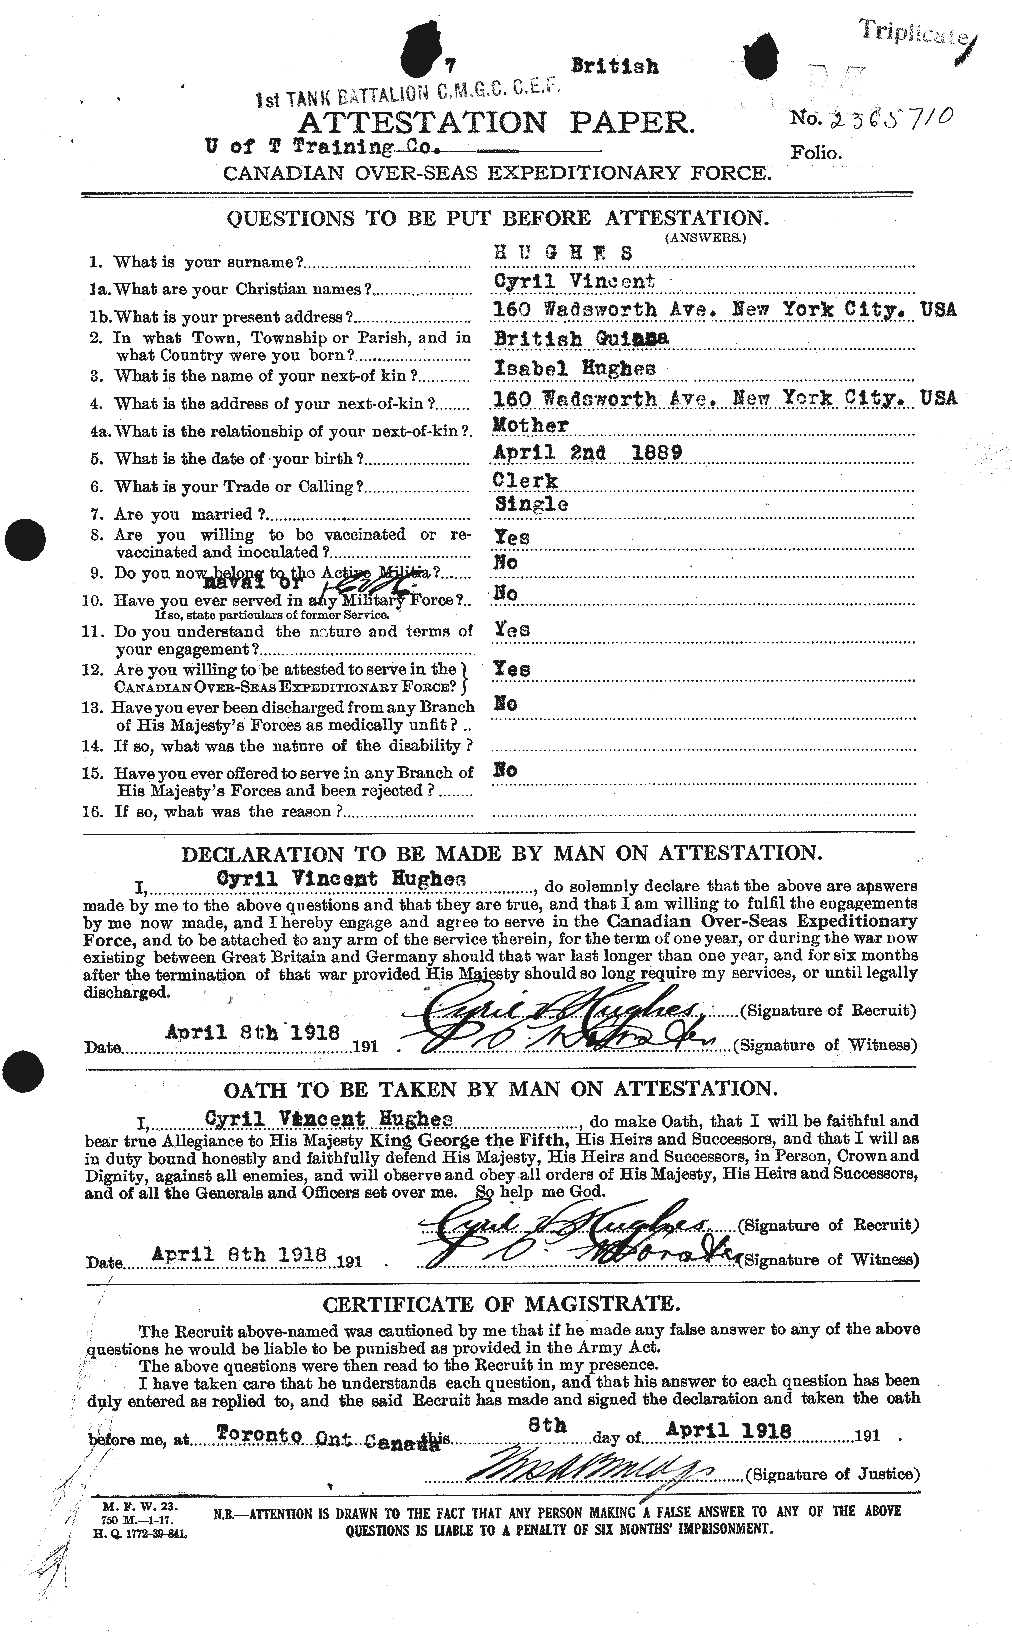 Personnel Records of the First World War - CEF 402638a